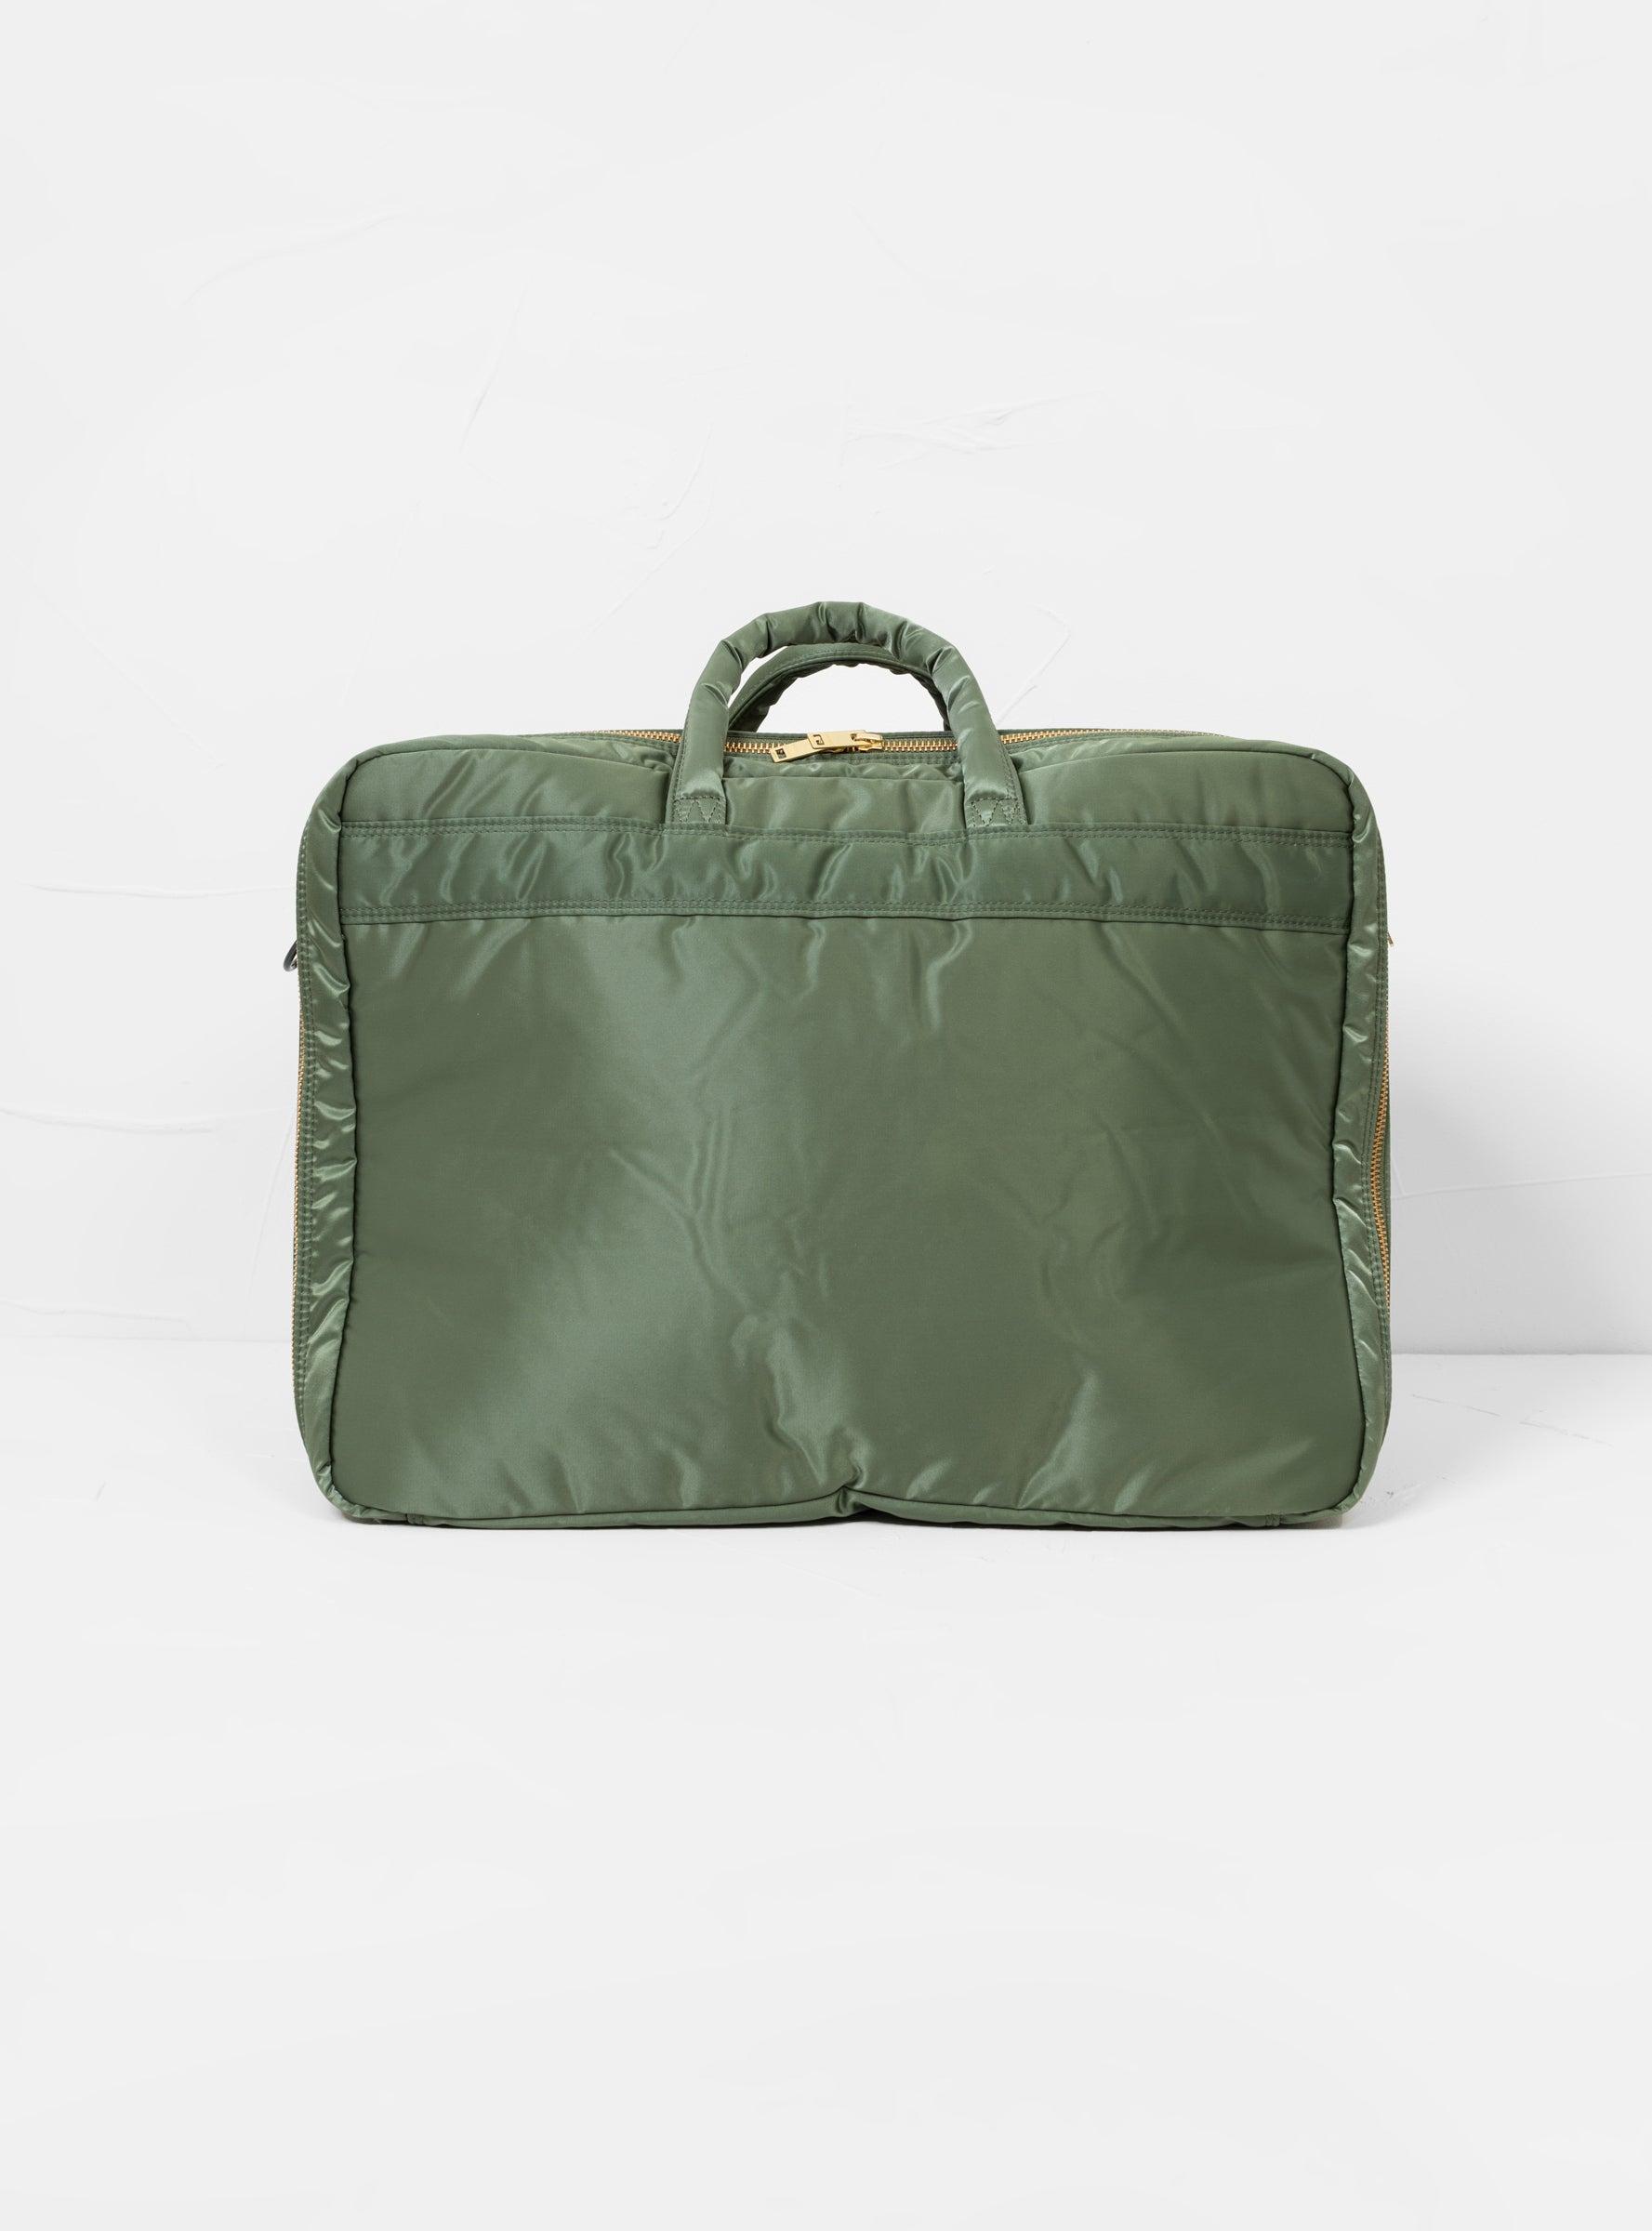 for Men Green Mens Bags Luggage and suitcases Porter-Yoshida and Co Synthetic L Boston Bag in Sage 